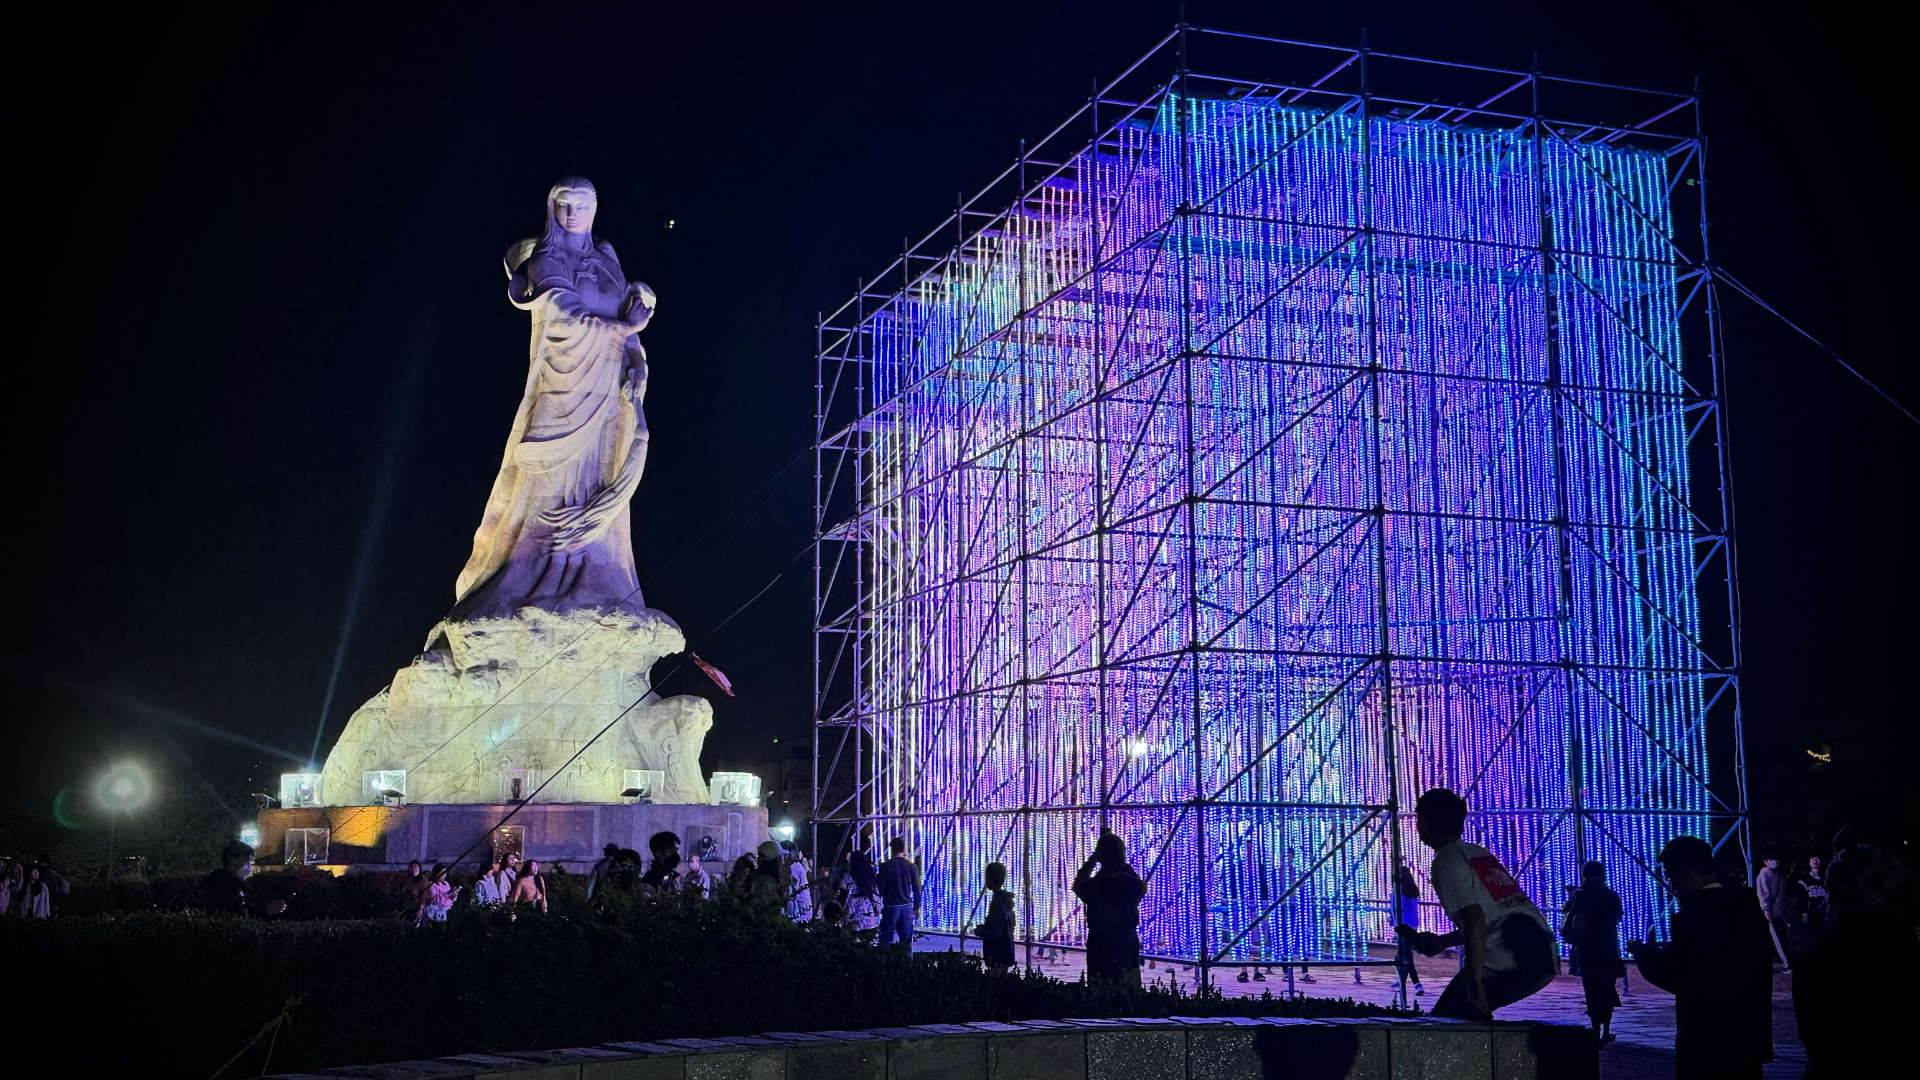 The Journey of Prosperity art installation – a cube-like shape comprising thousands of strands of hanging lights, with a large classical statue in the background.